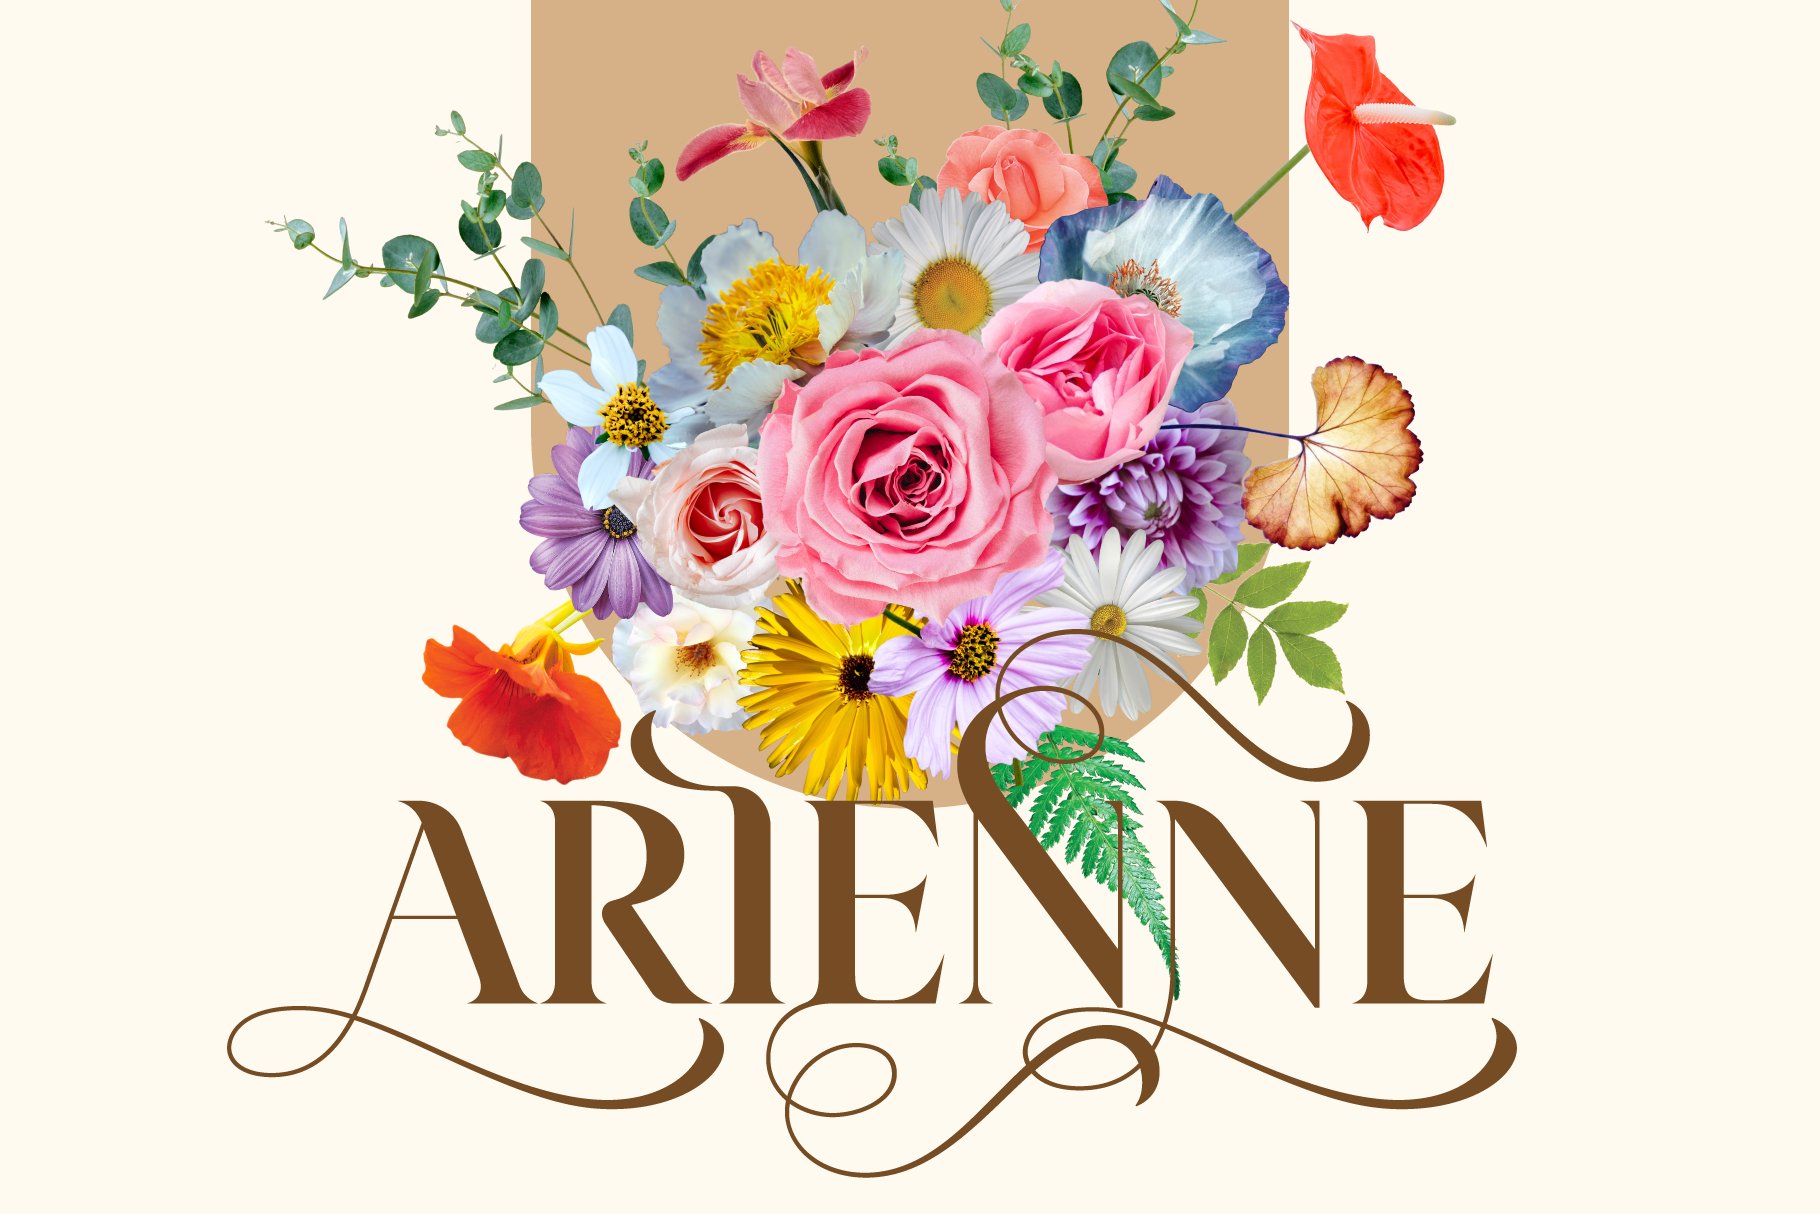 Arienne - Serif Typeface cover image.